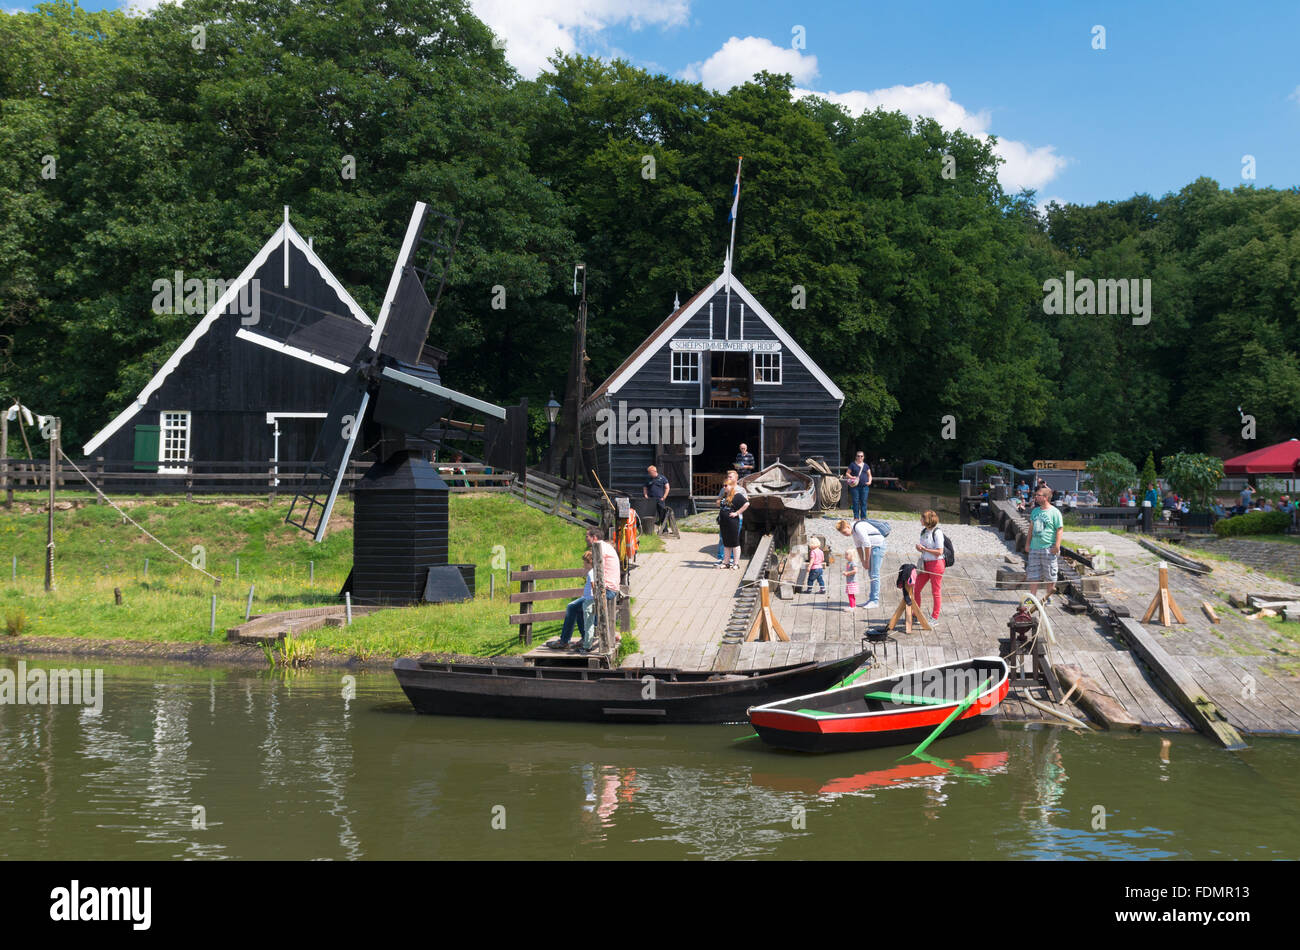 ARNHEM, NETHERLANDS - JULY 26, 2015: Unknown tourists in the Netherlands Open Air museum. The museum shows the Dutch history fro Stock Photo